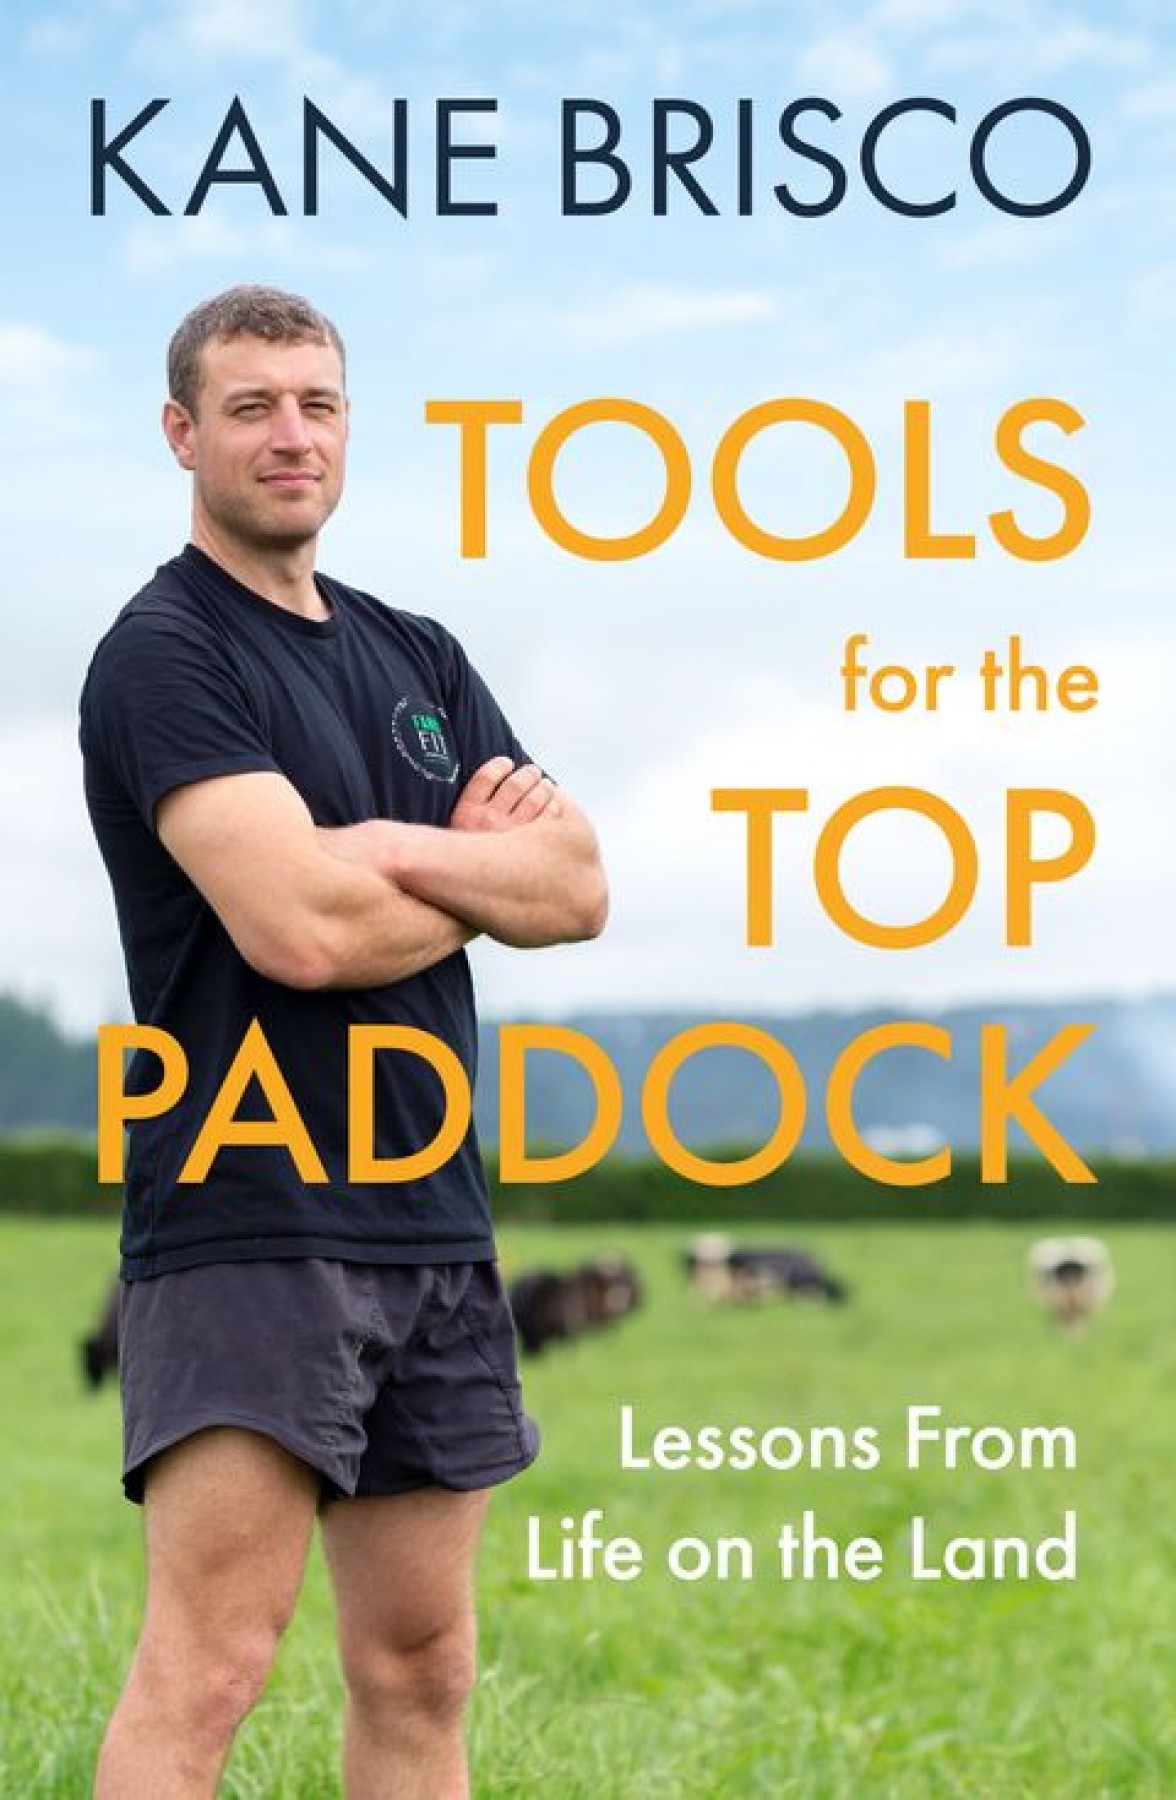 Tools for the top paddock: Lessons from life on the land